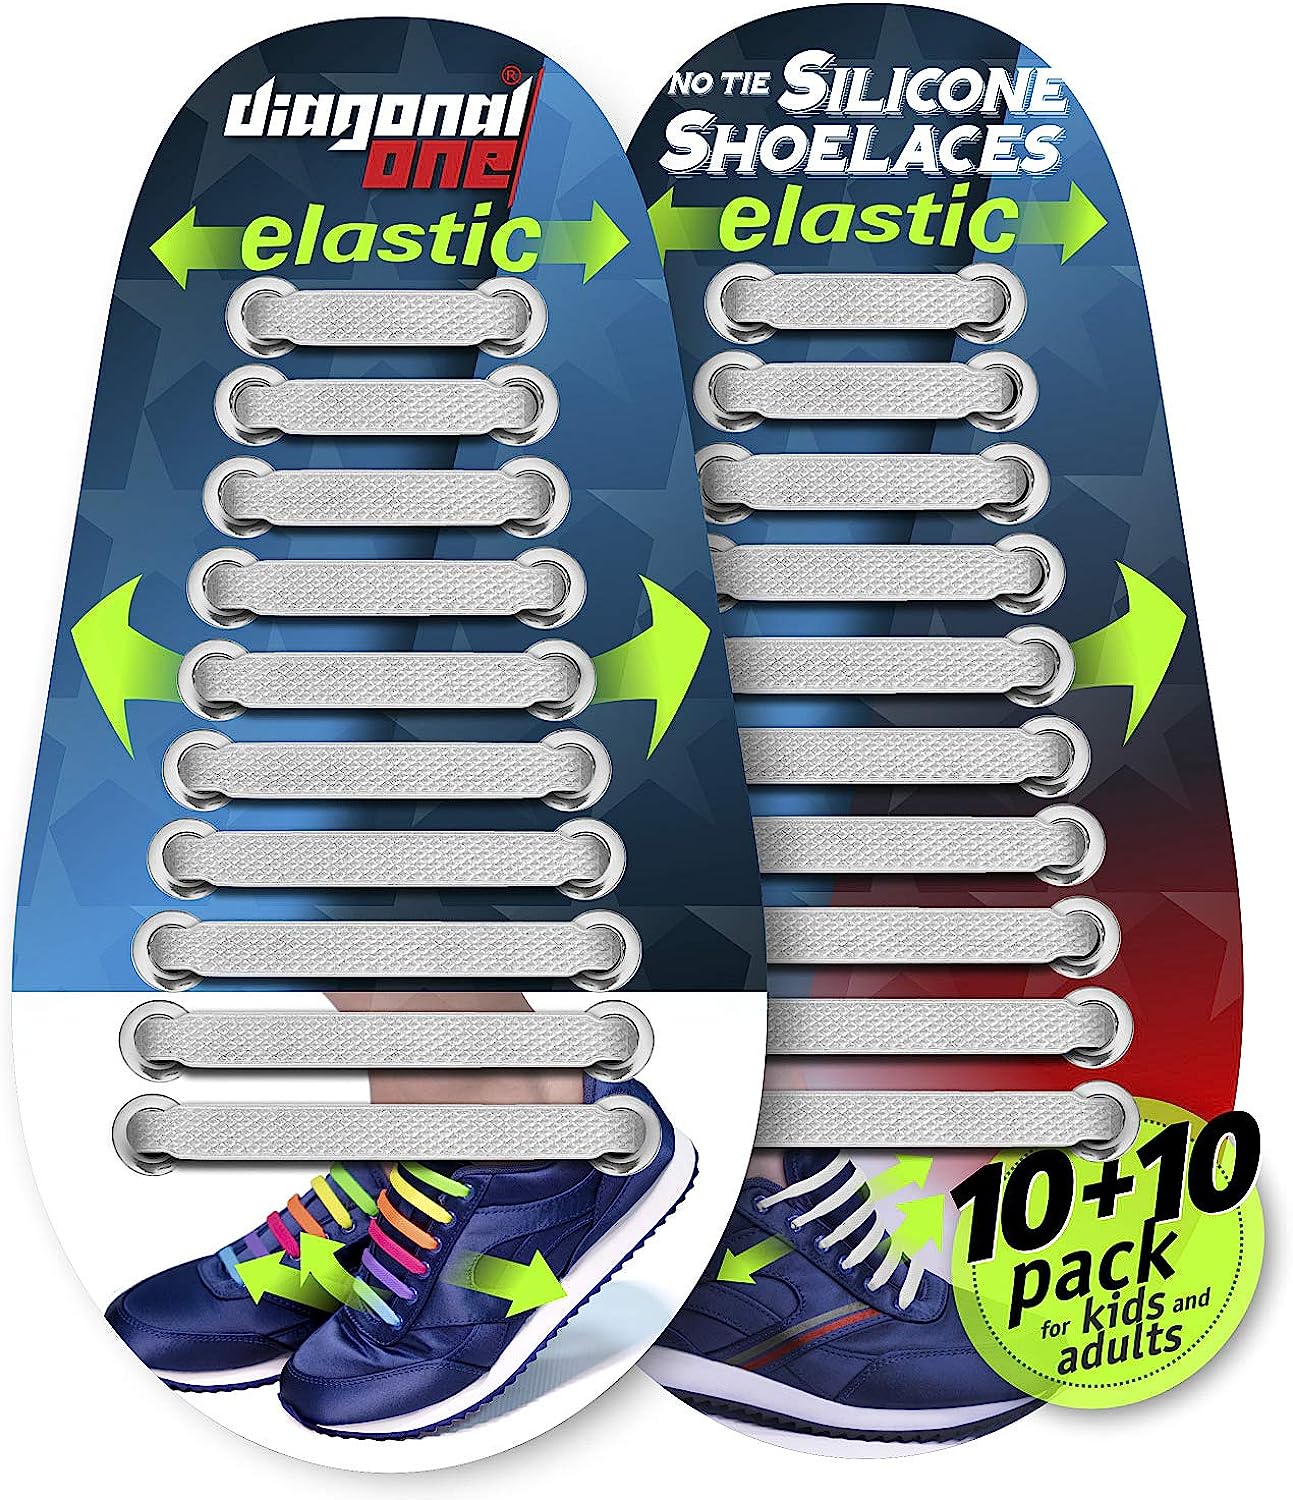 DIAGONAL ONE No Tie Shoe Laces for Adults - Elastic [...]